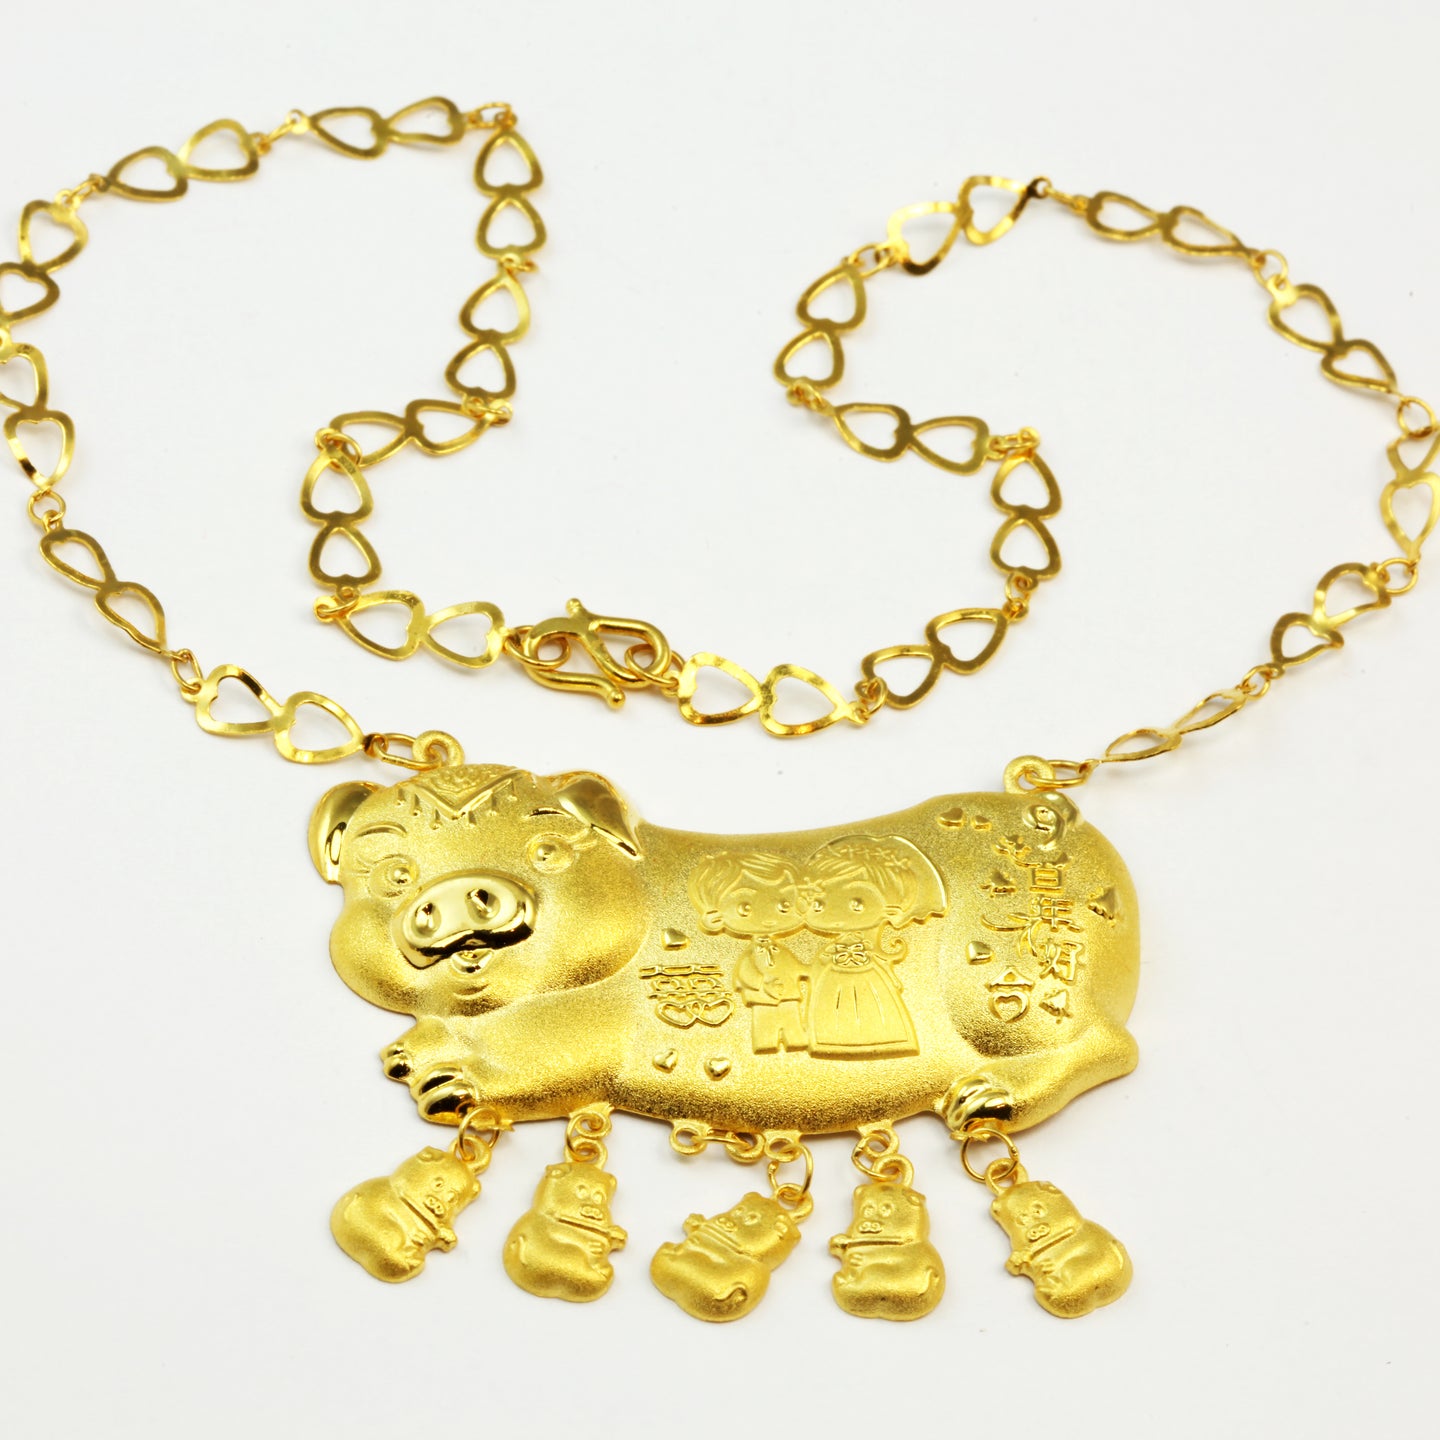 24K Solid Yellow Gold Wedding Pigs Chain Necklace 11 Grams